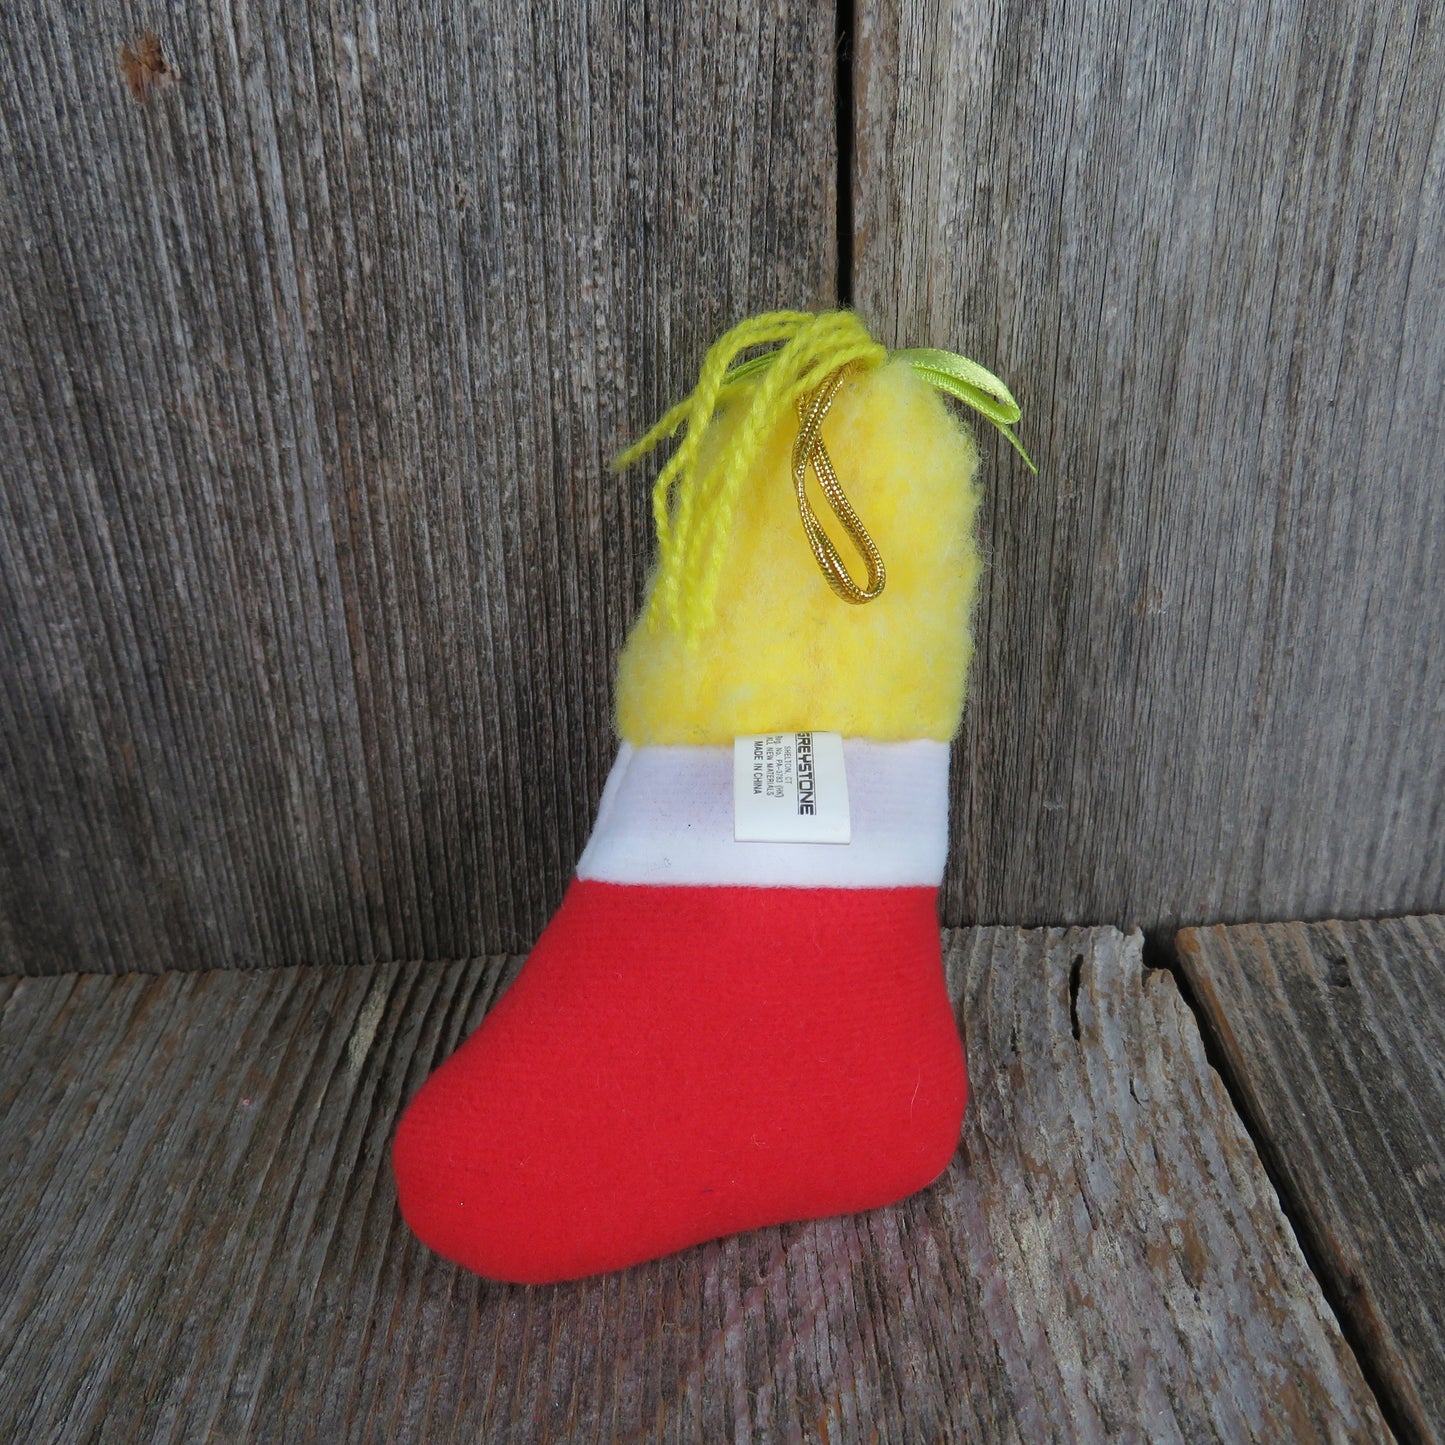 Vintage Banana In Stocking Ornament Plush Christmas Yumkins Del Monte Fruit and Vegetables 1991 Yellow - At Grandma's Table